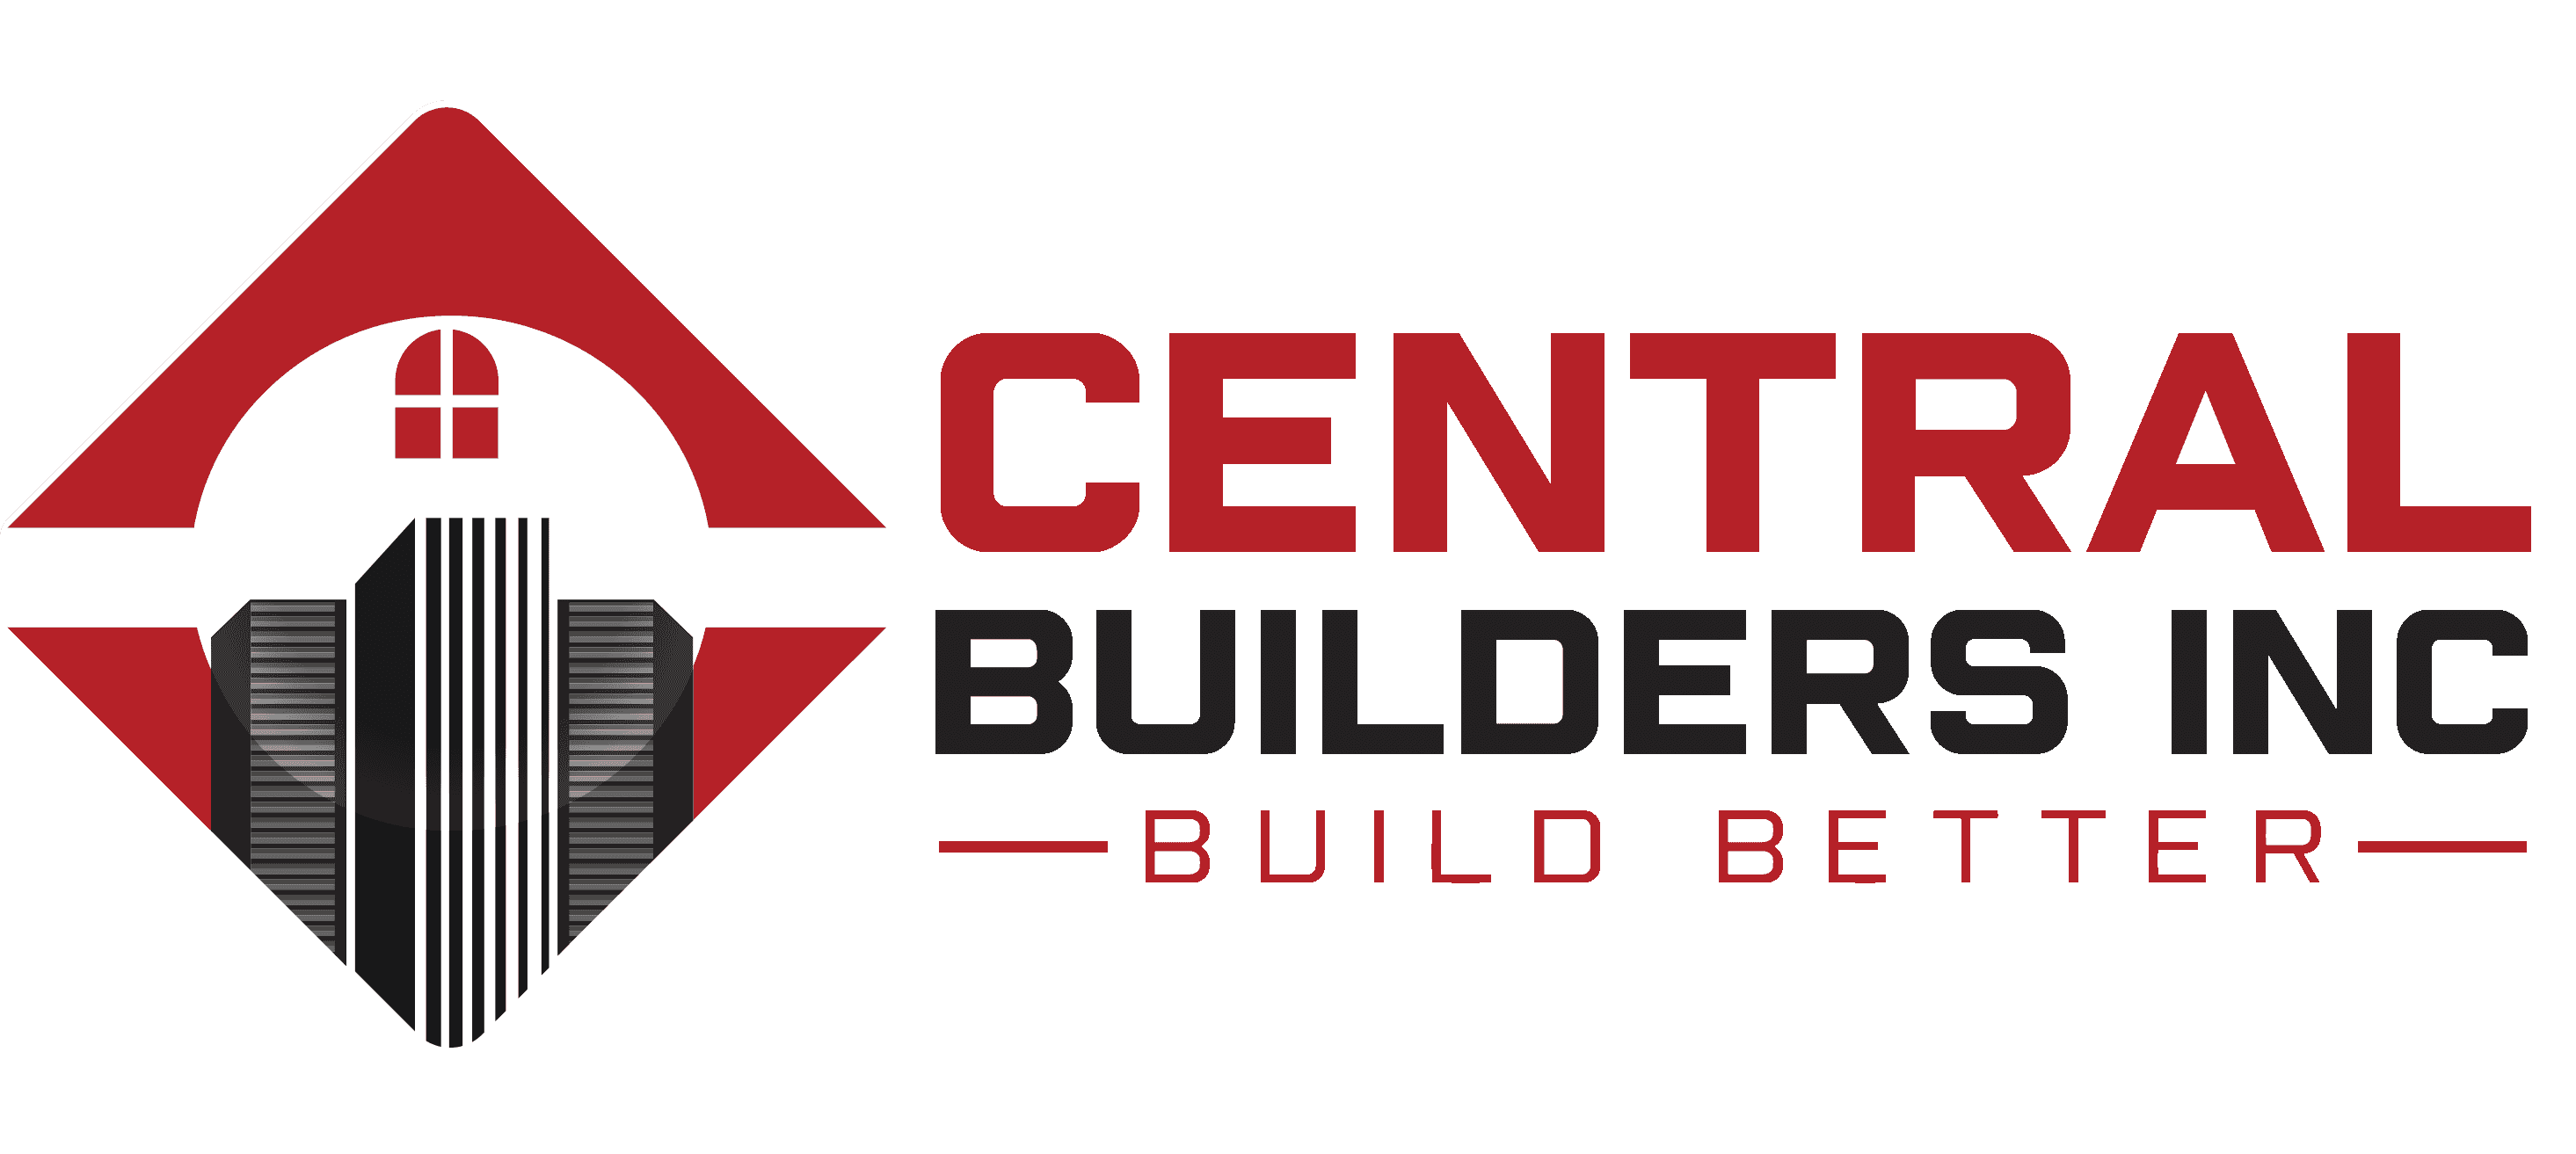 Central Builders Inc